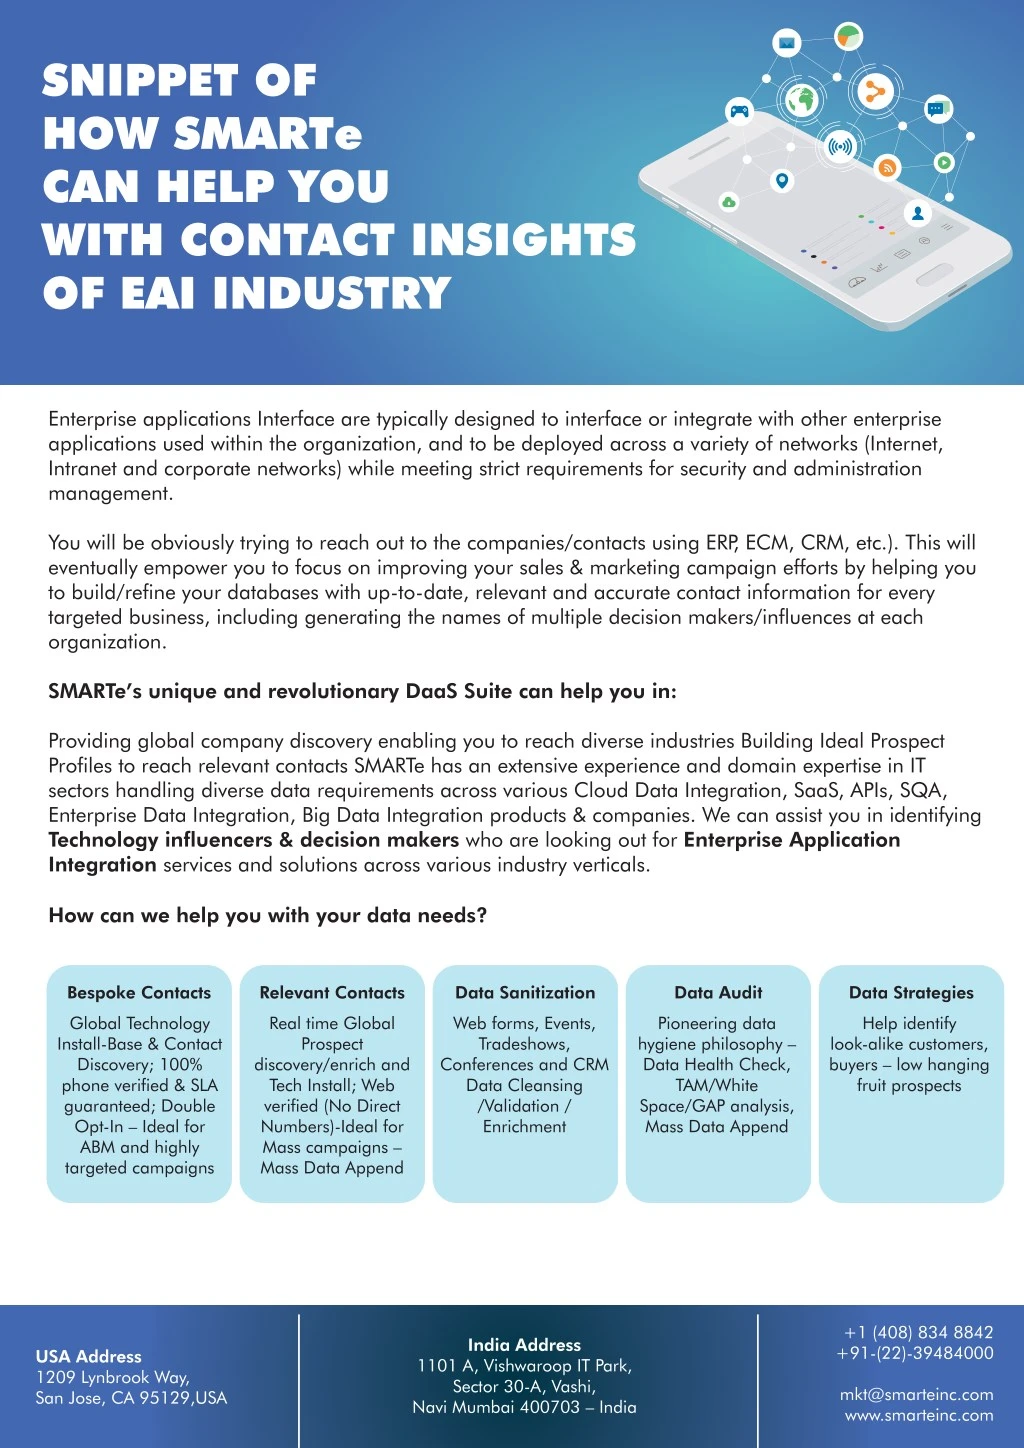 snippet of how smarte can help you with contact